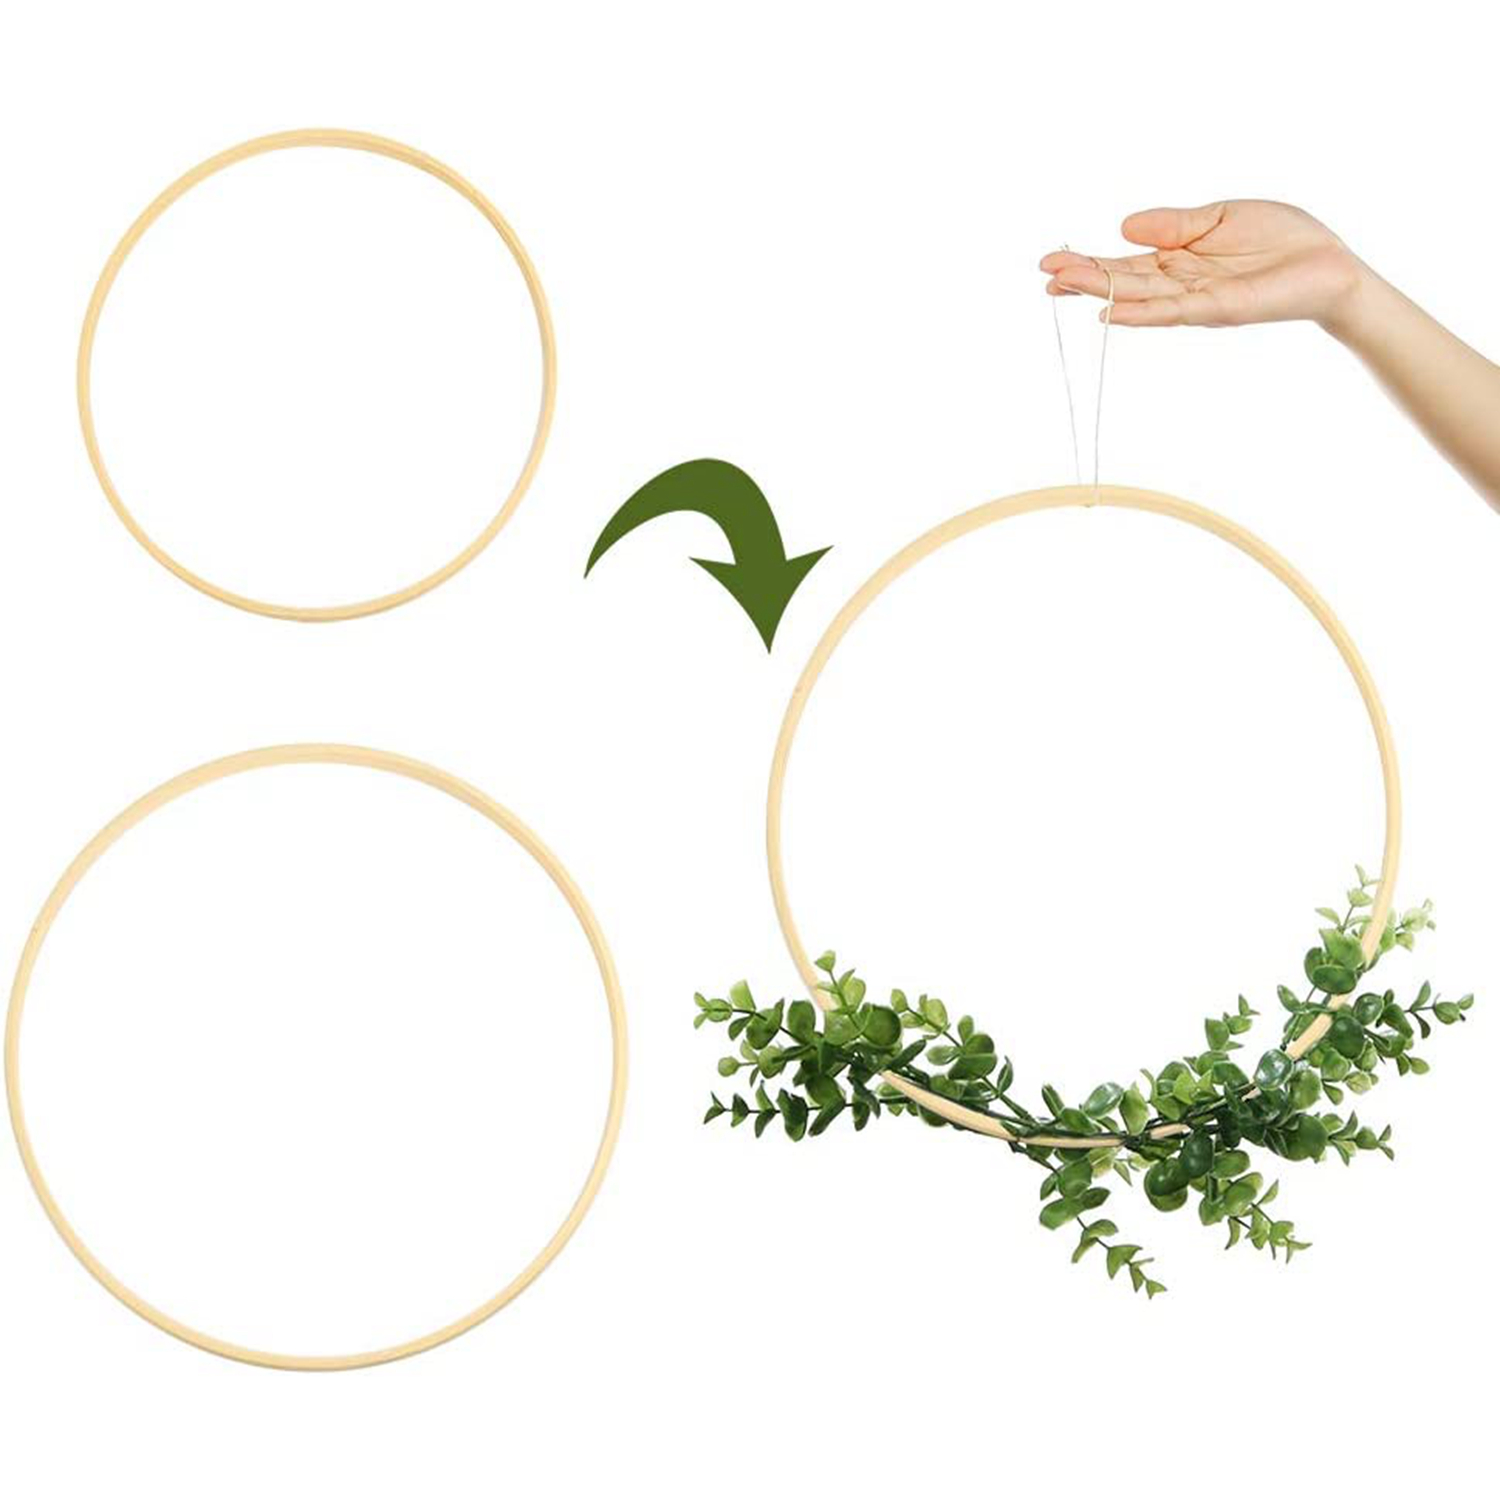 Worown 16 Pack Bamboo Floral Hoops, 8 Sizes (4, 5, 6, 7, 8, 9, 10 & 12 inch) Wooden Wreath Rings for Making Wedding Decor and Wa